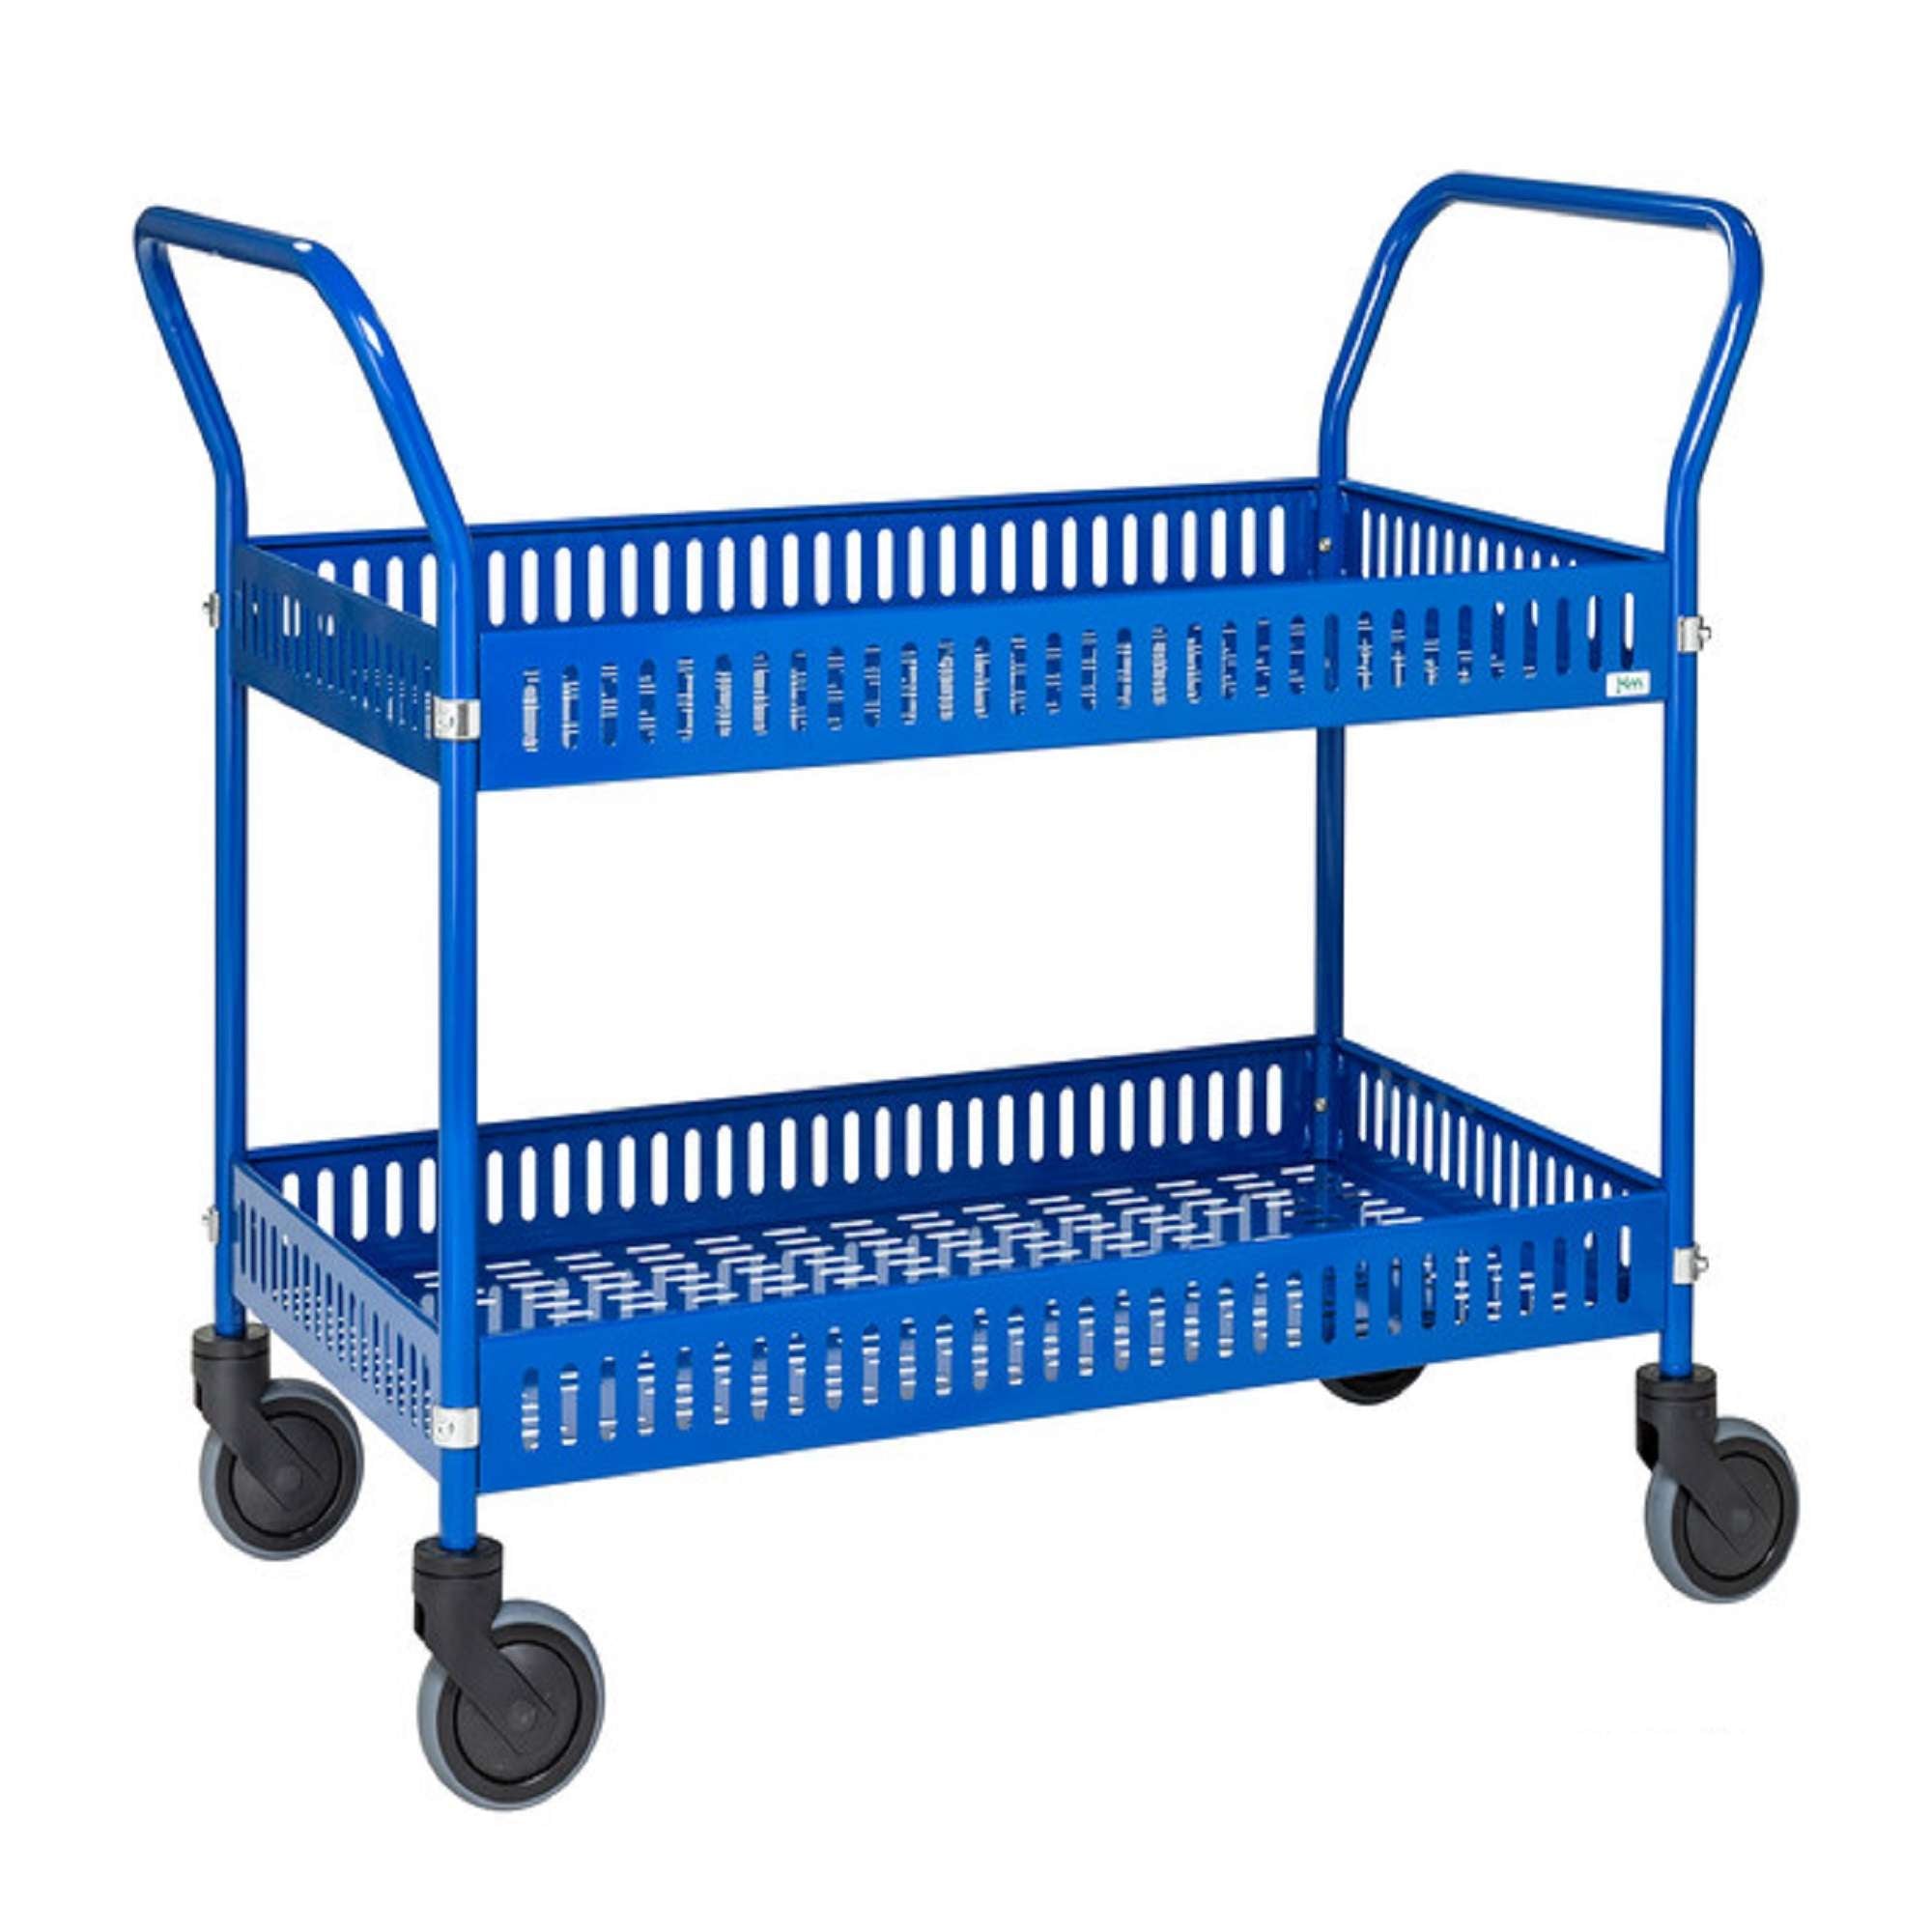 Trolley table with 2 shelves, 90mm edge, 4 swivel casters 1130x550x940